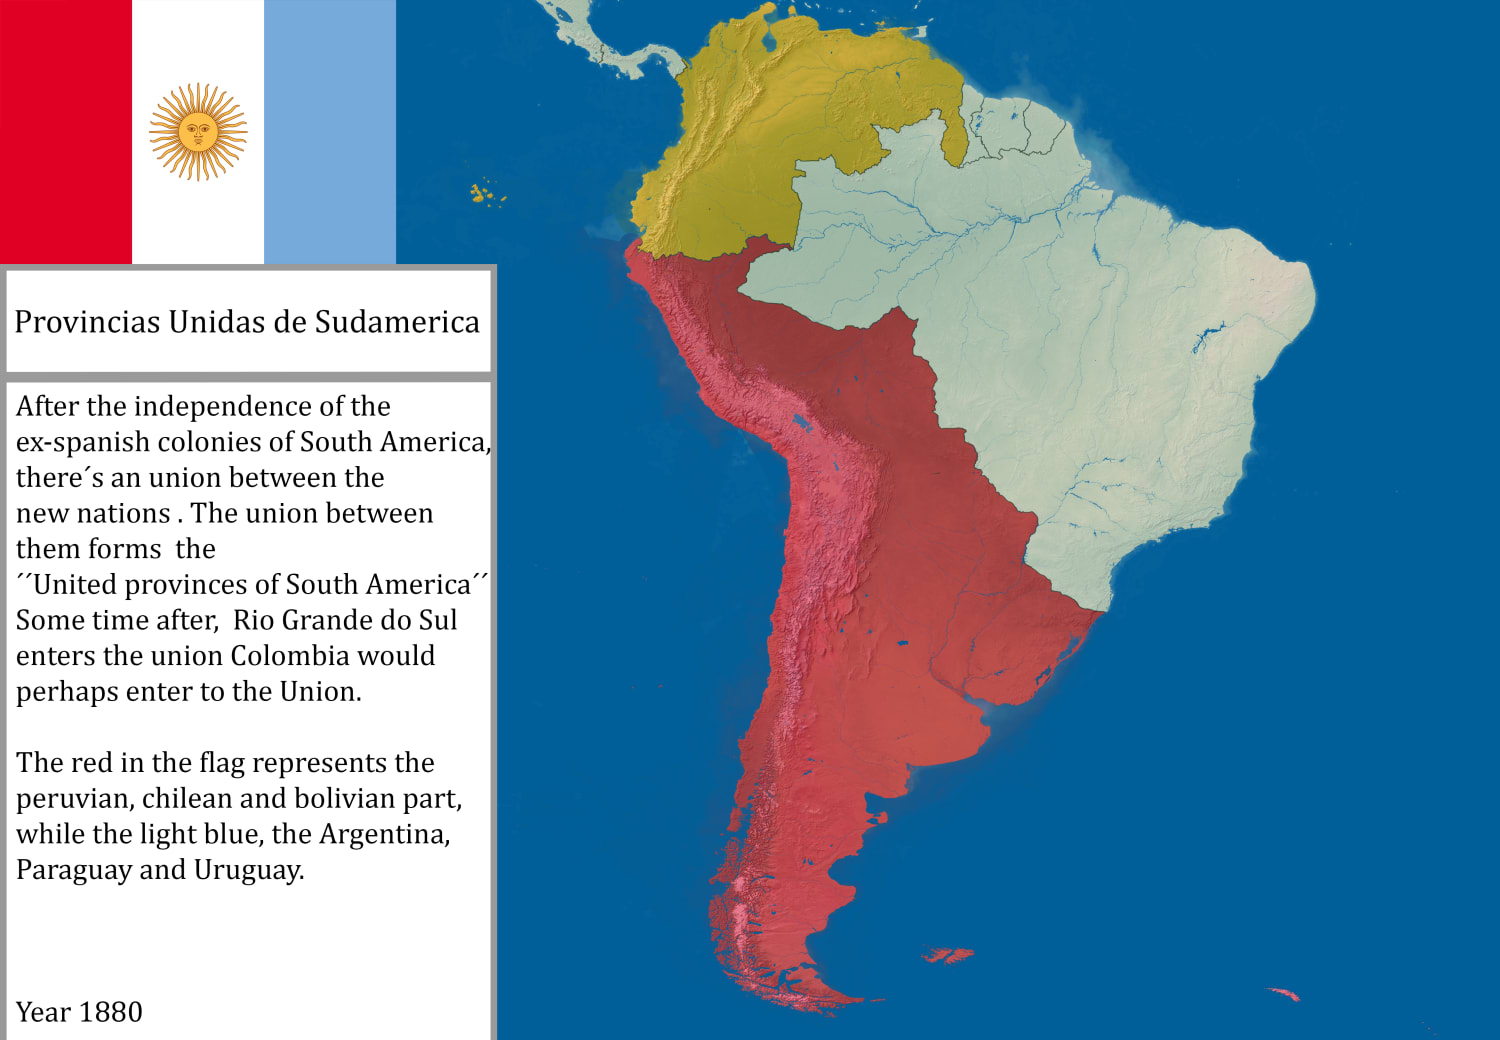 The United Provinces of South America. If the hispanic South America got independence in a more unificated way.